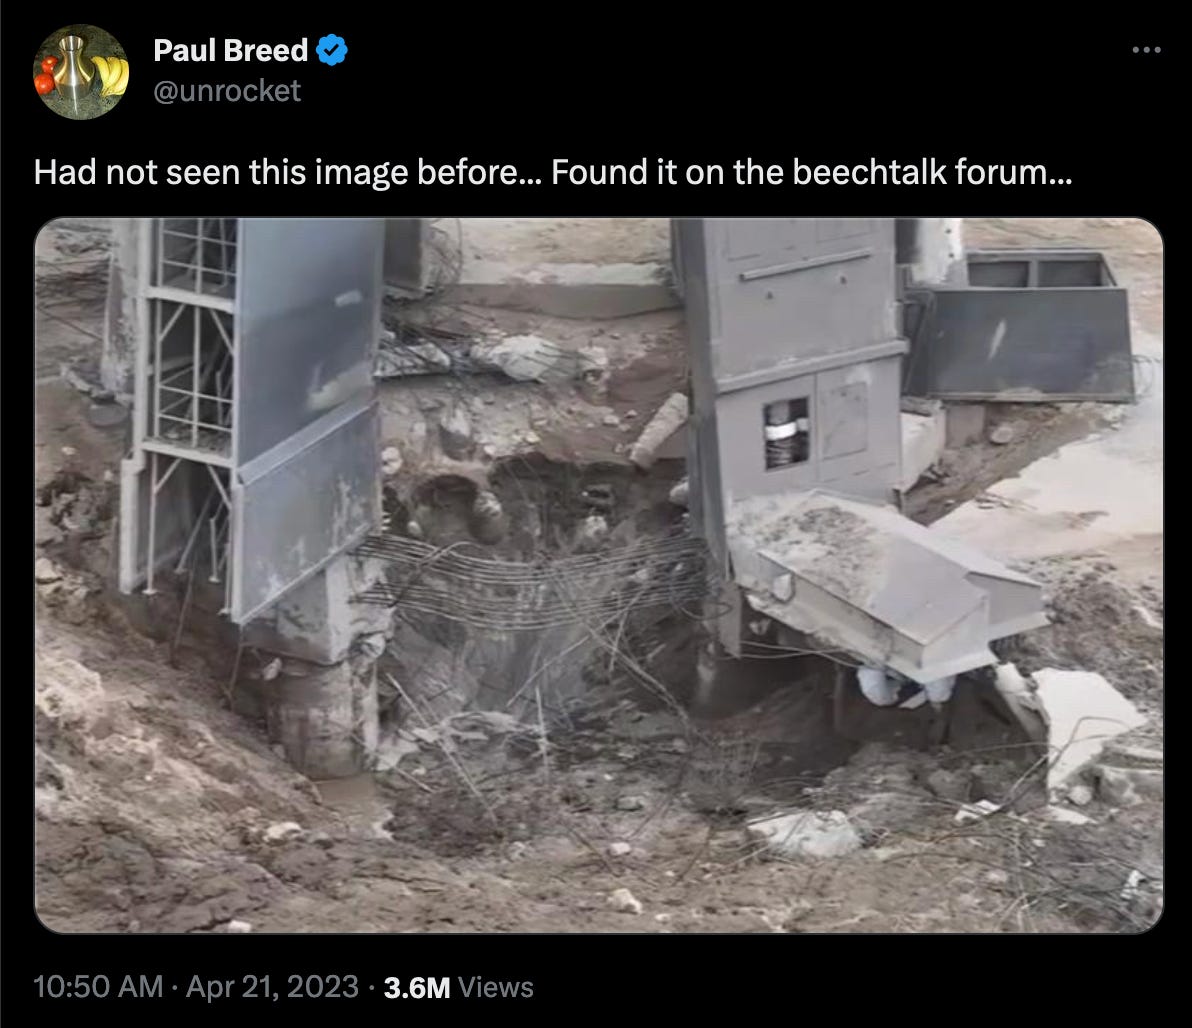 A screenshot of a Tweet by Paul Breed (@unrocket). The text of the tweet reads "Had not seen this image before... Found it on the beechtalk forum." The photo shows a large crater, with rebar still strung across it.